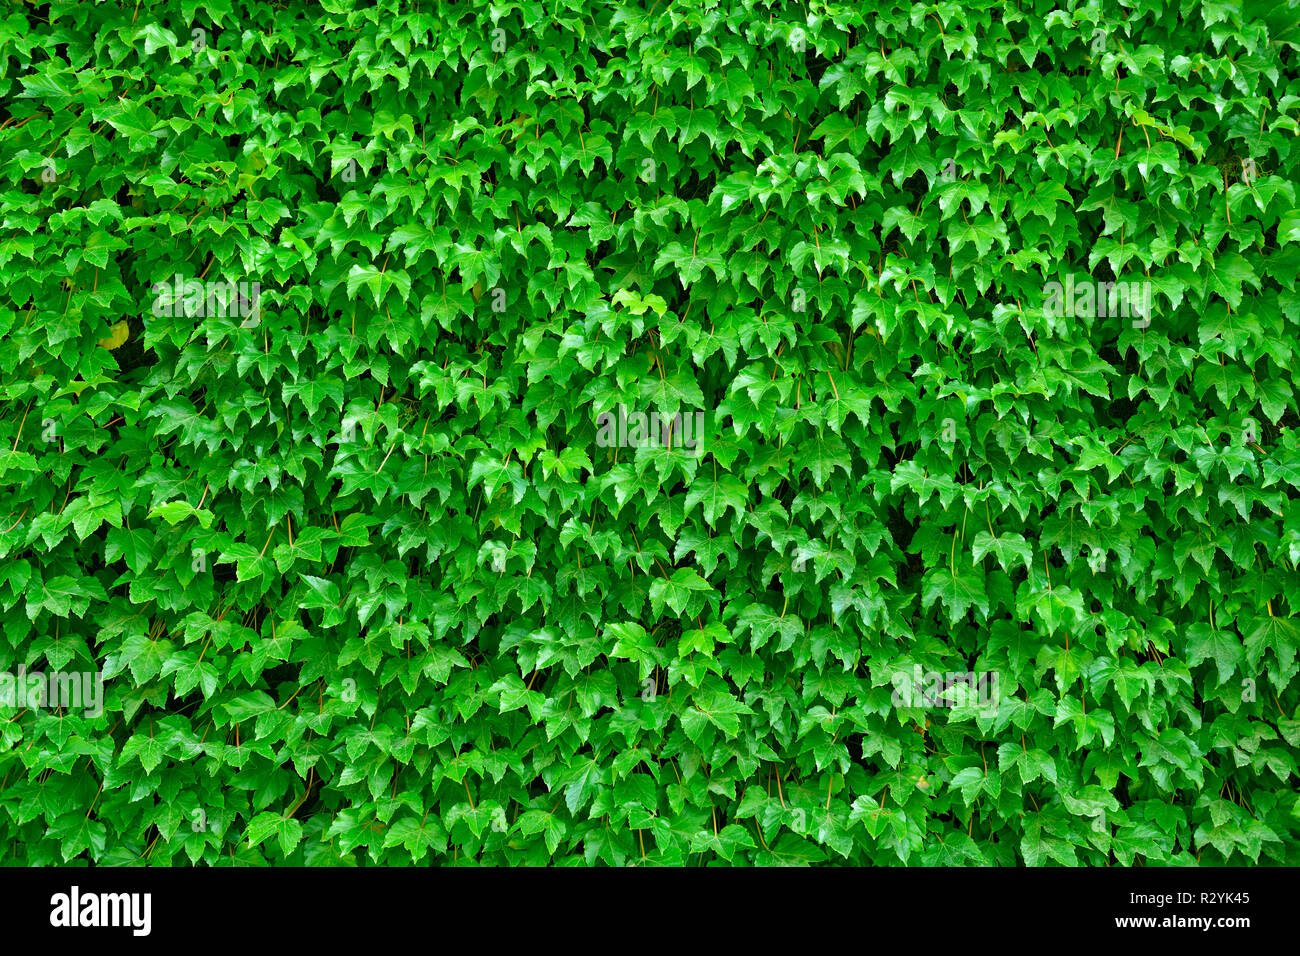 Green Leaves Background Stock Photo